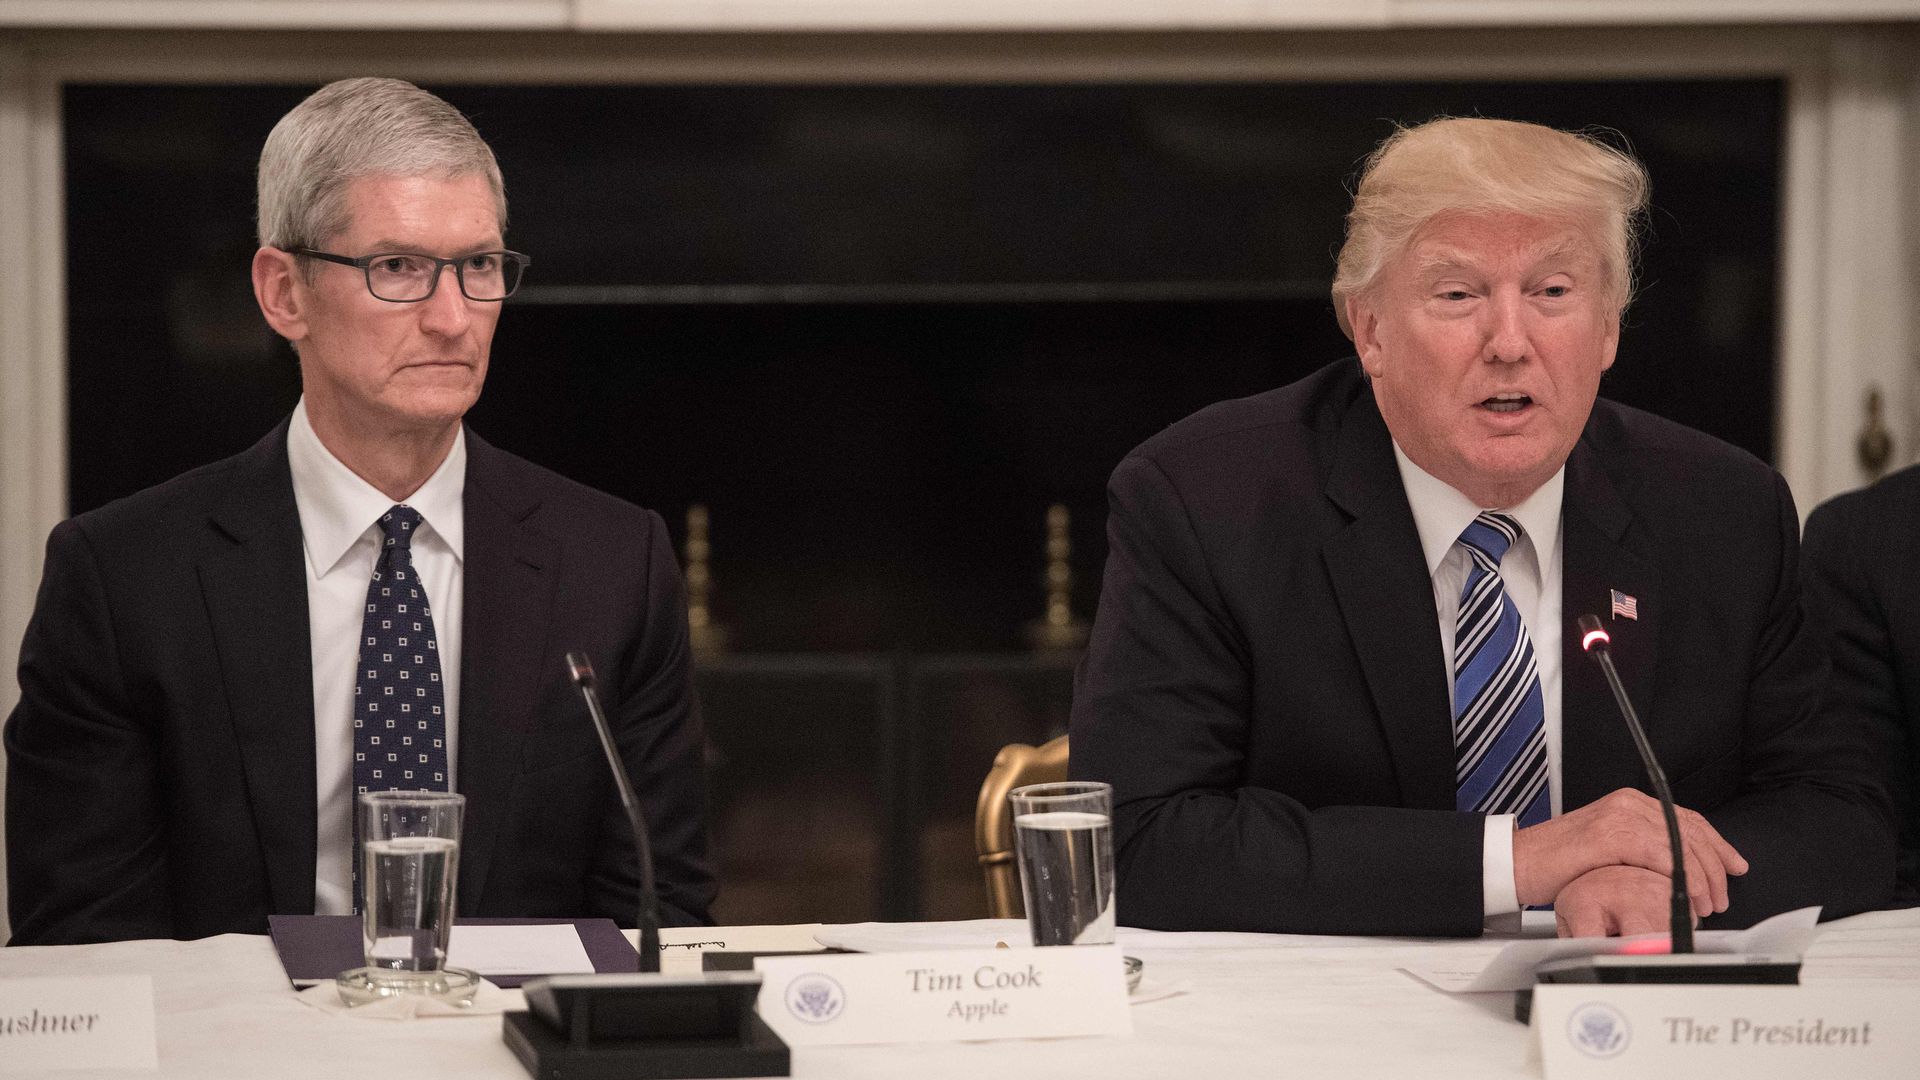 President Trump meeting with Apple CEO Tim Cook